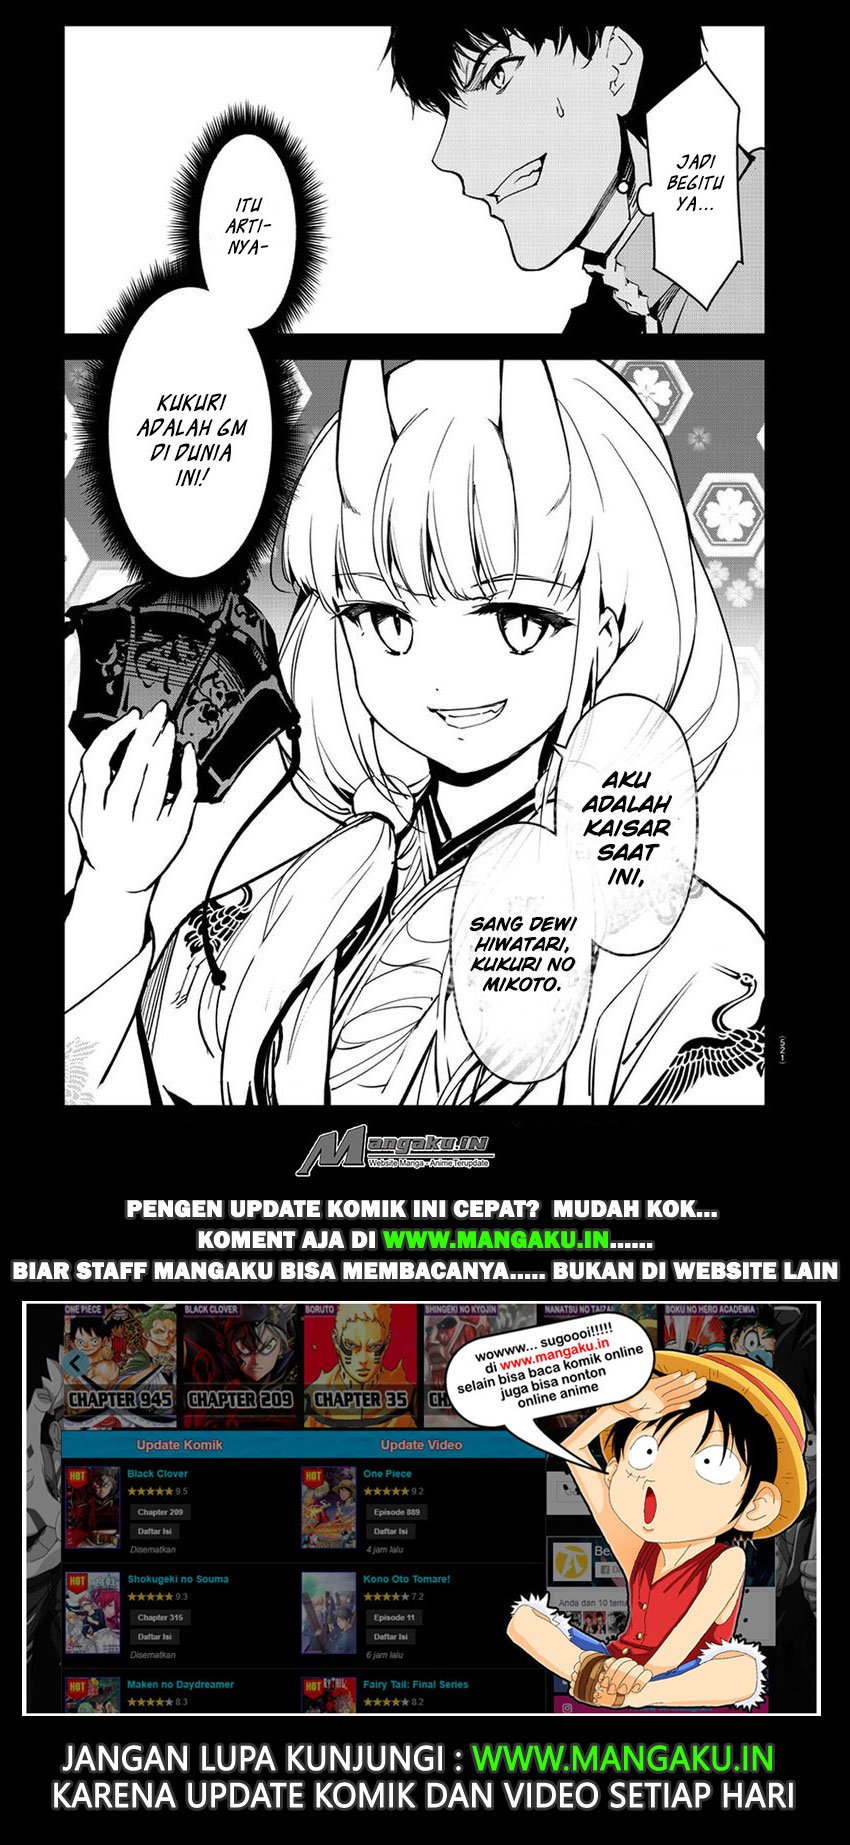 Darwin’s Game Chapter 76-2